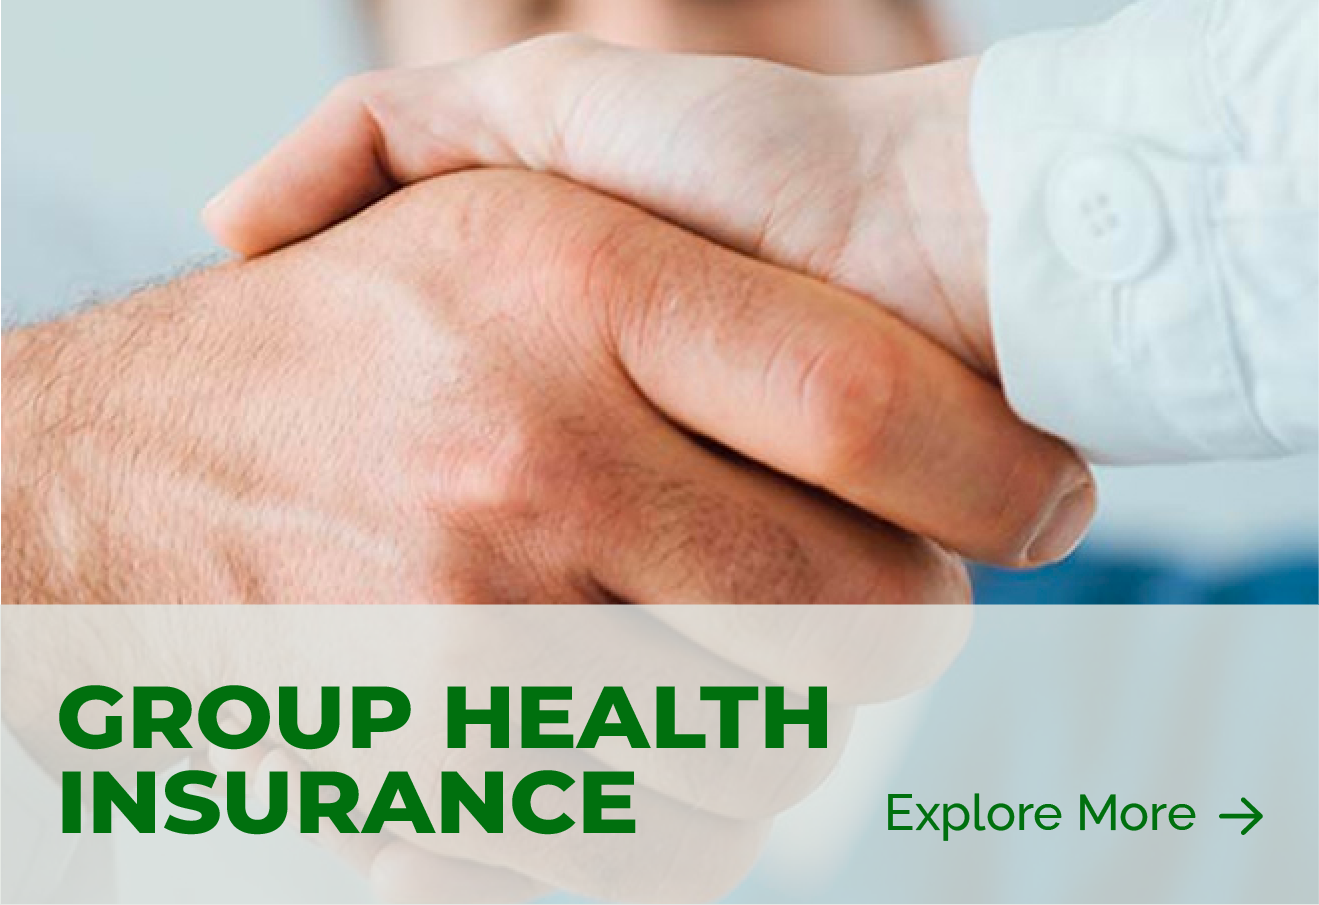 Easy Payment Plans on Group Health Insurance for SMEs